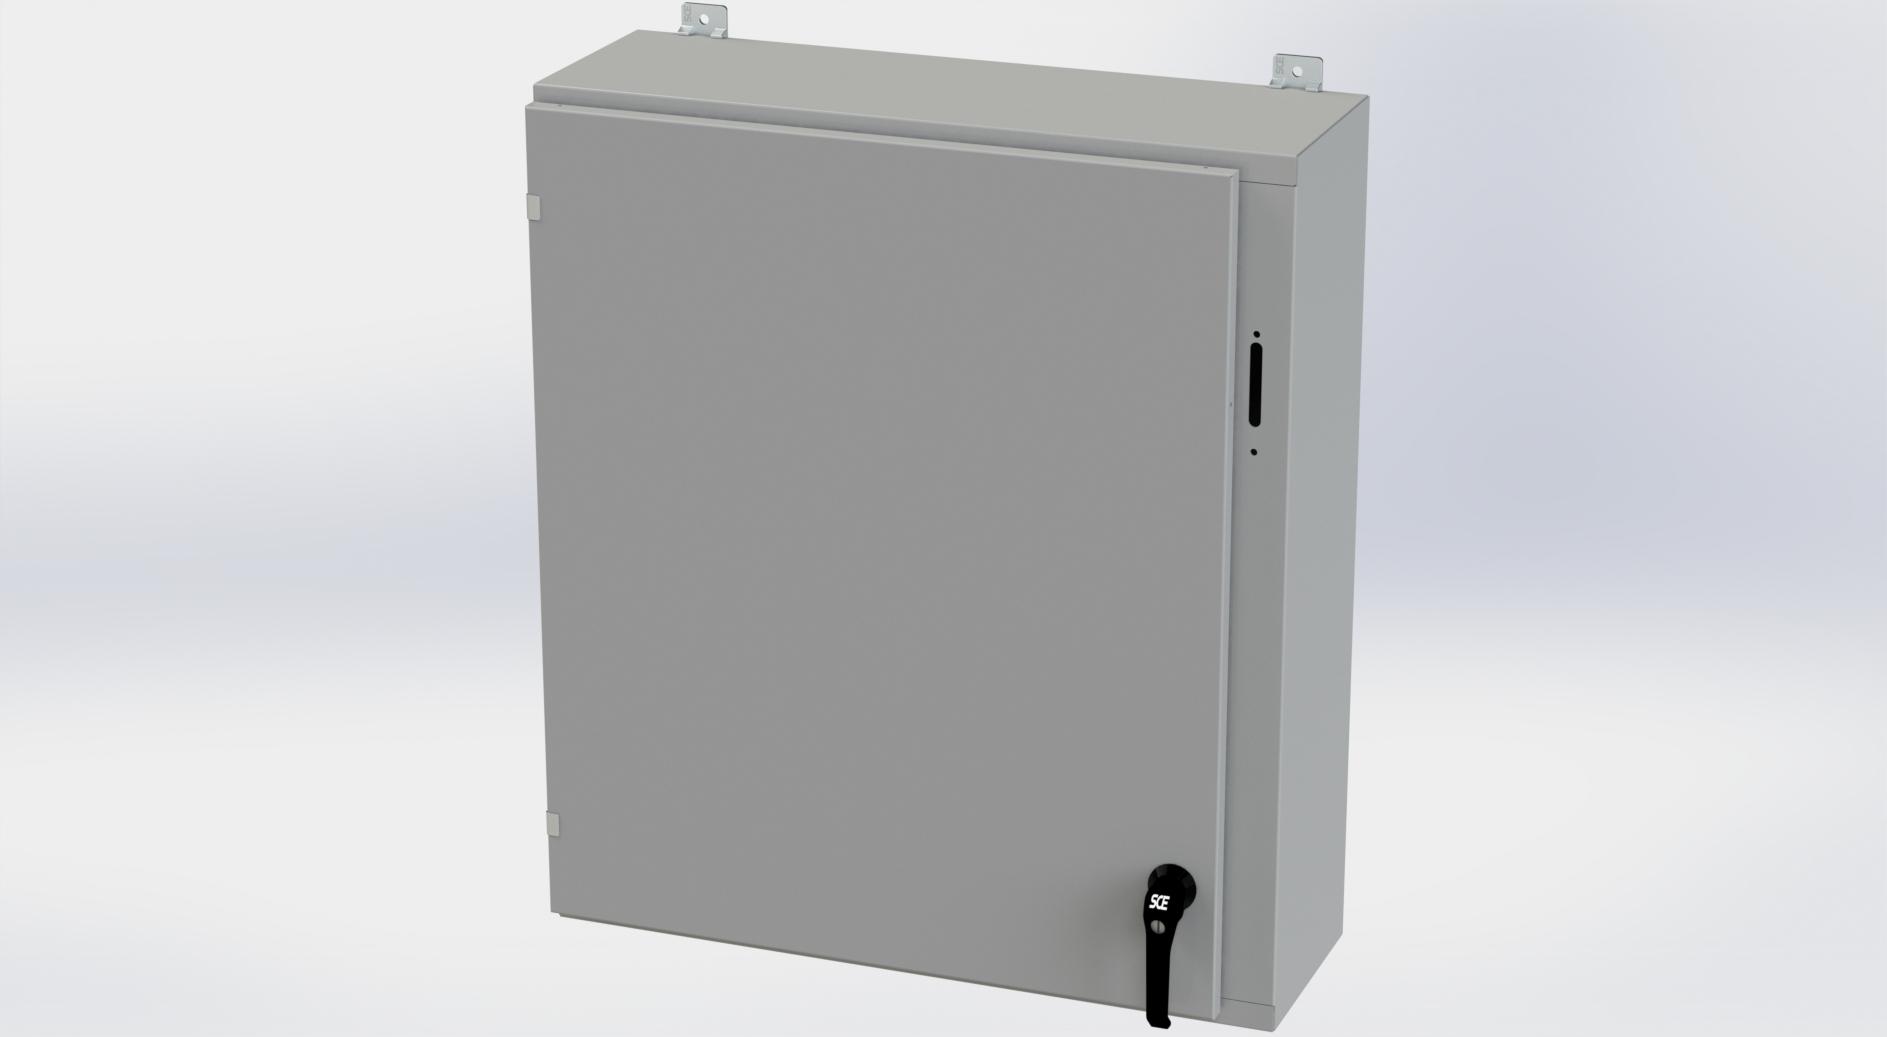 Saginaw Control SCE-36SA3210LPPL Obselete Use SCE-36XEL3110LP, Height:36.00", Width:31.38", Depth:10.00", ANSI-61 gray powder coating inside and out. Optional sub-panels are powder coated white.